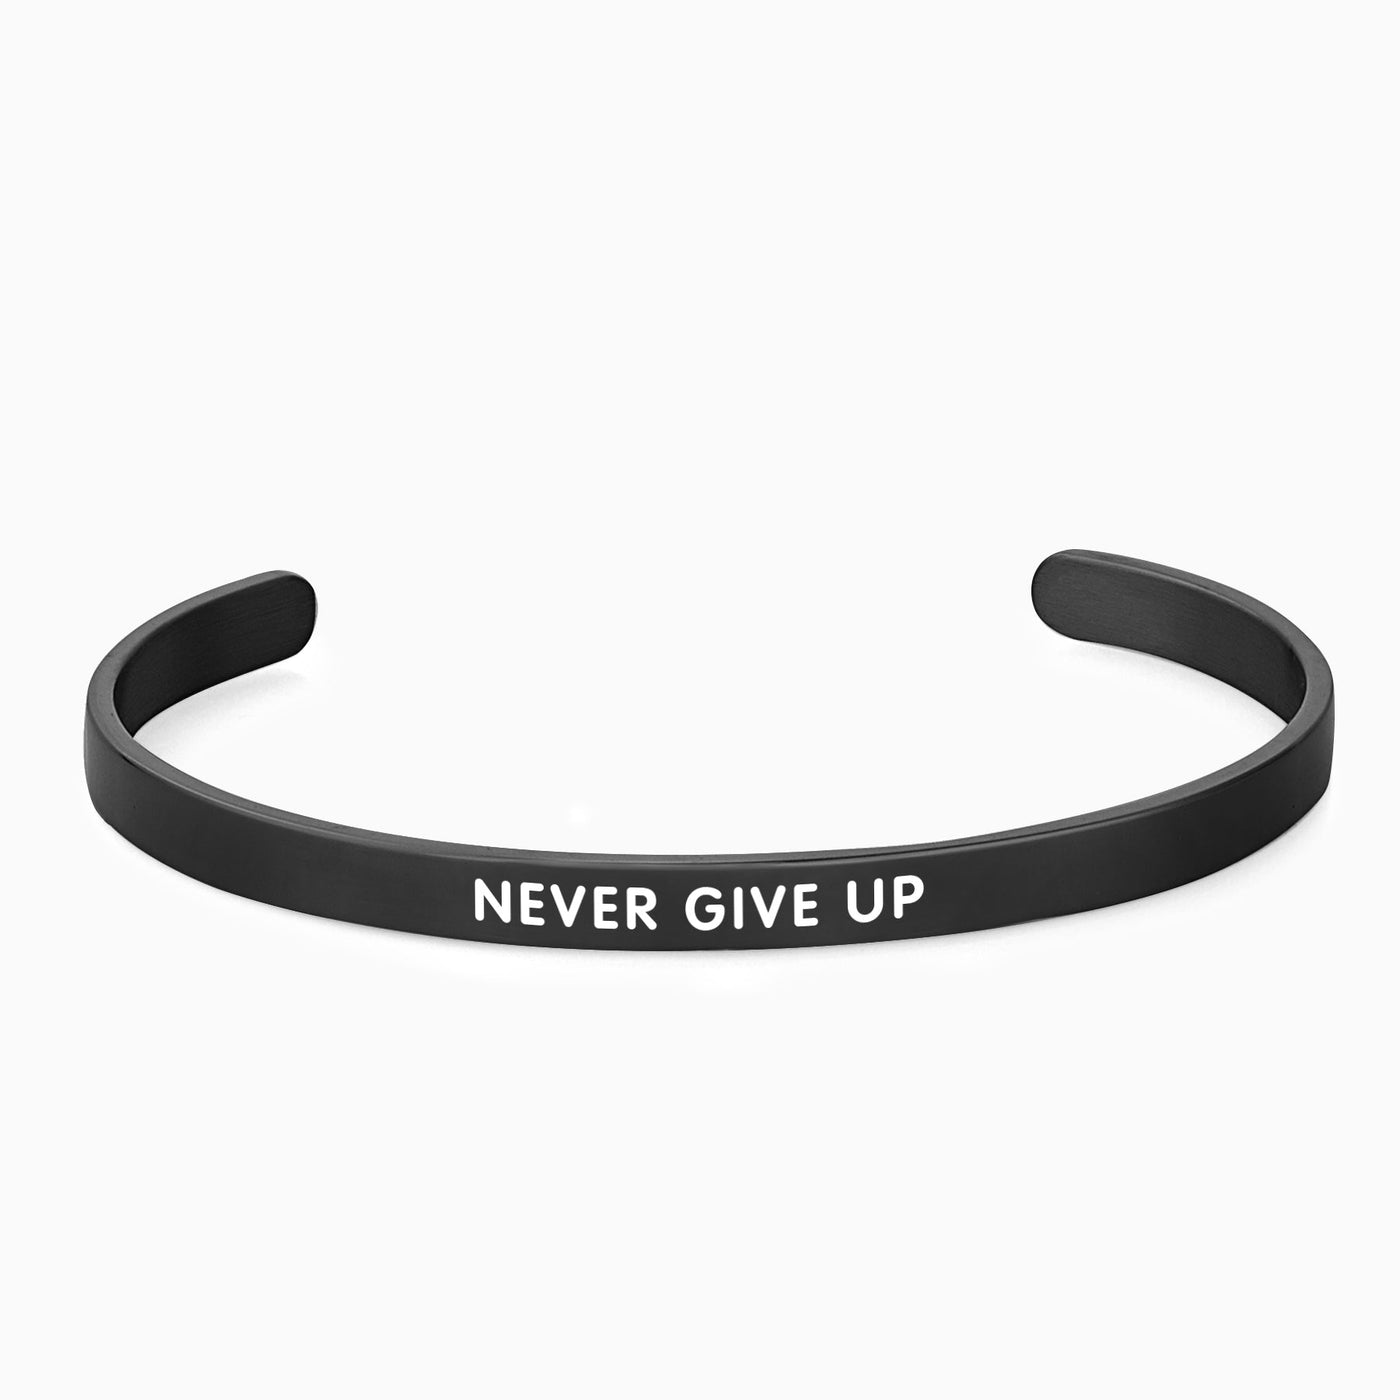 NEVER GIVE UP - OTANTO